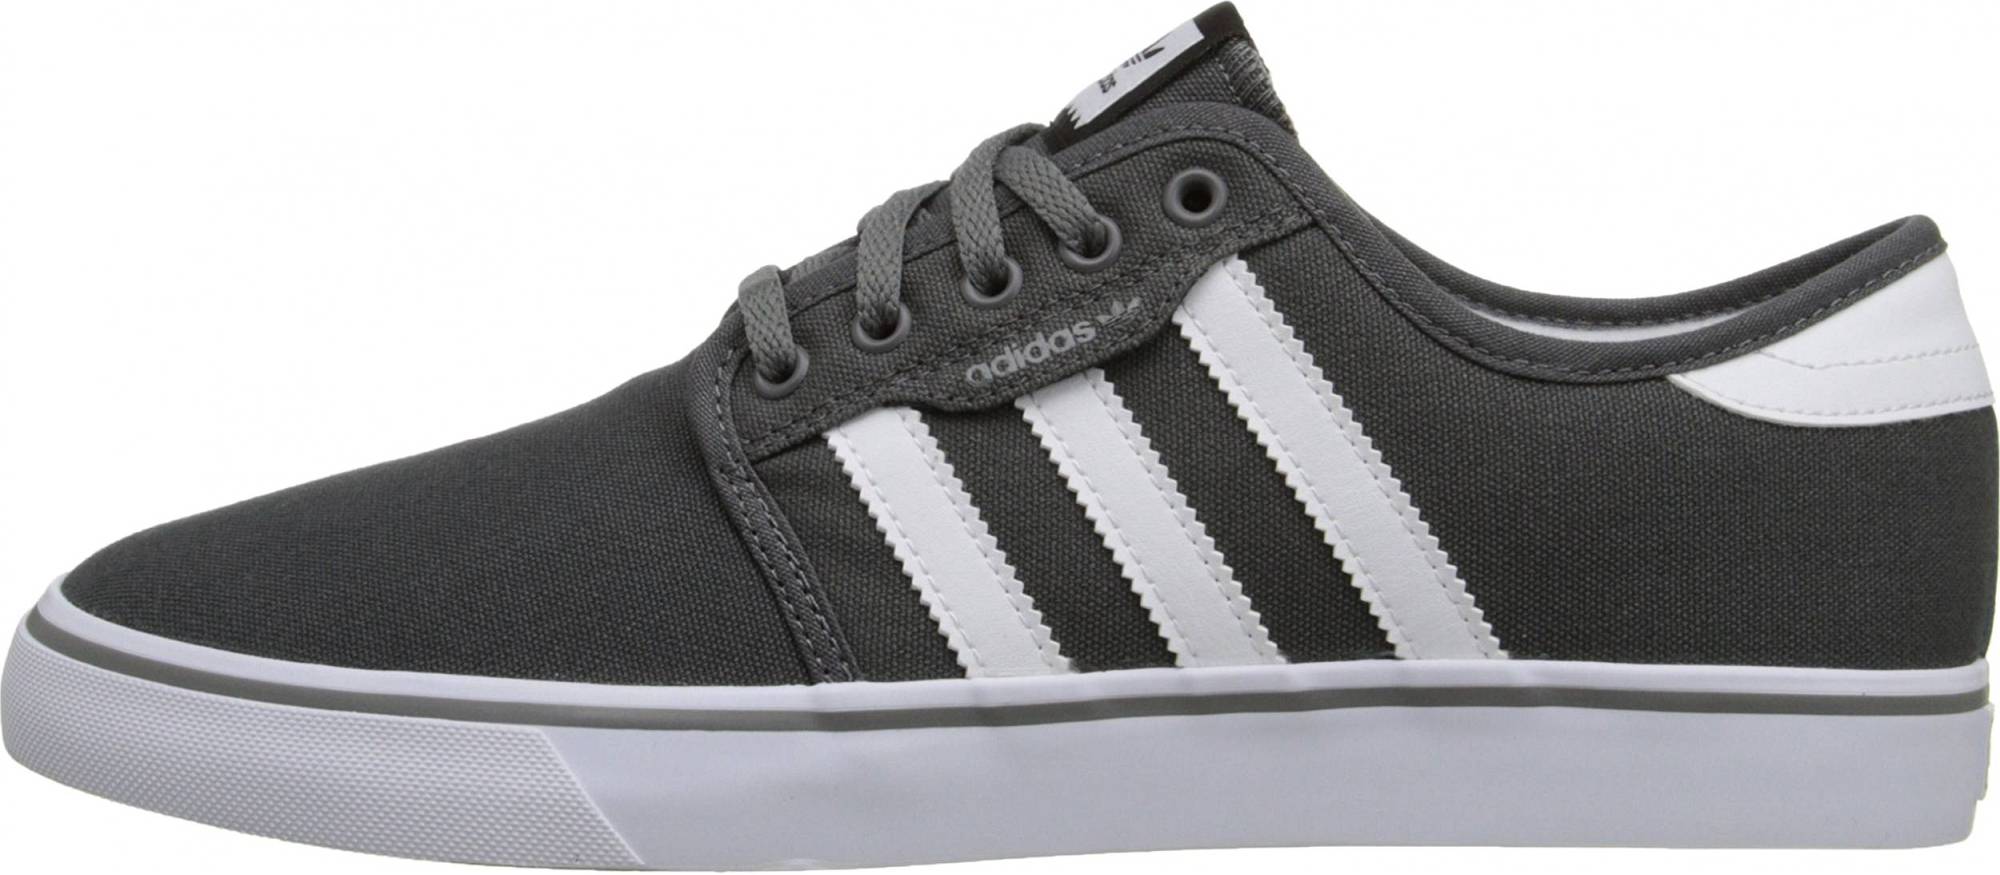 adidas seeley skate shoes review